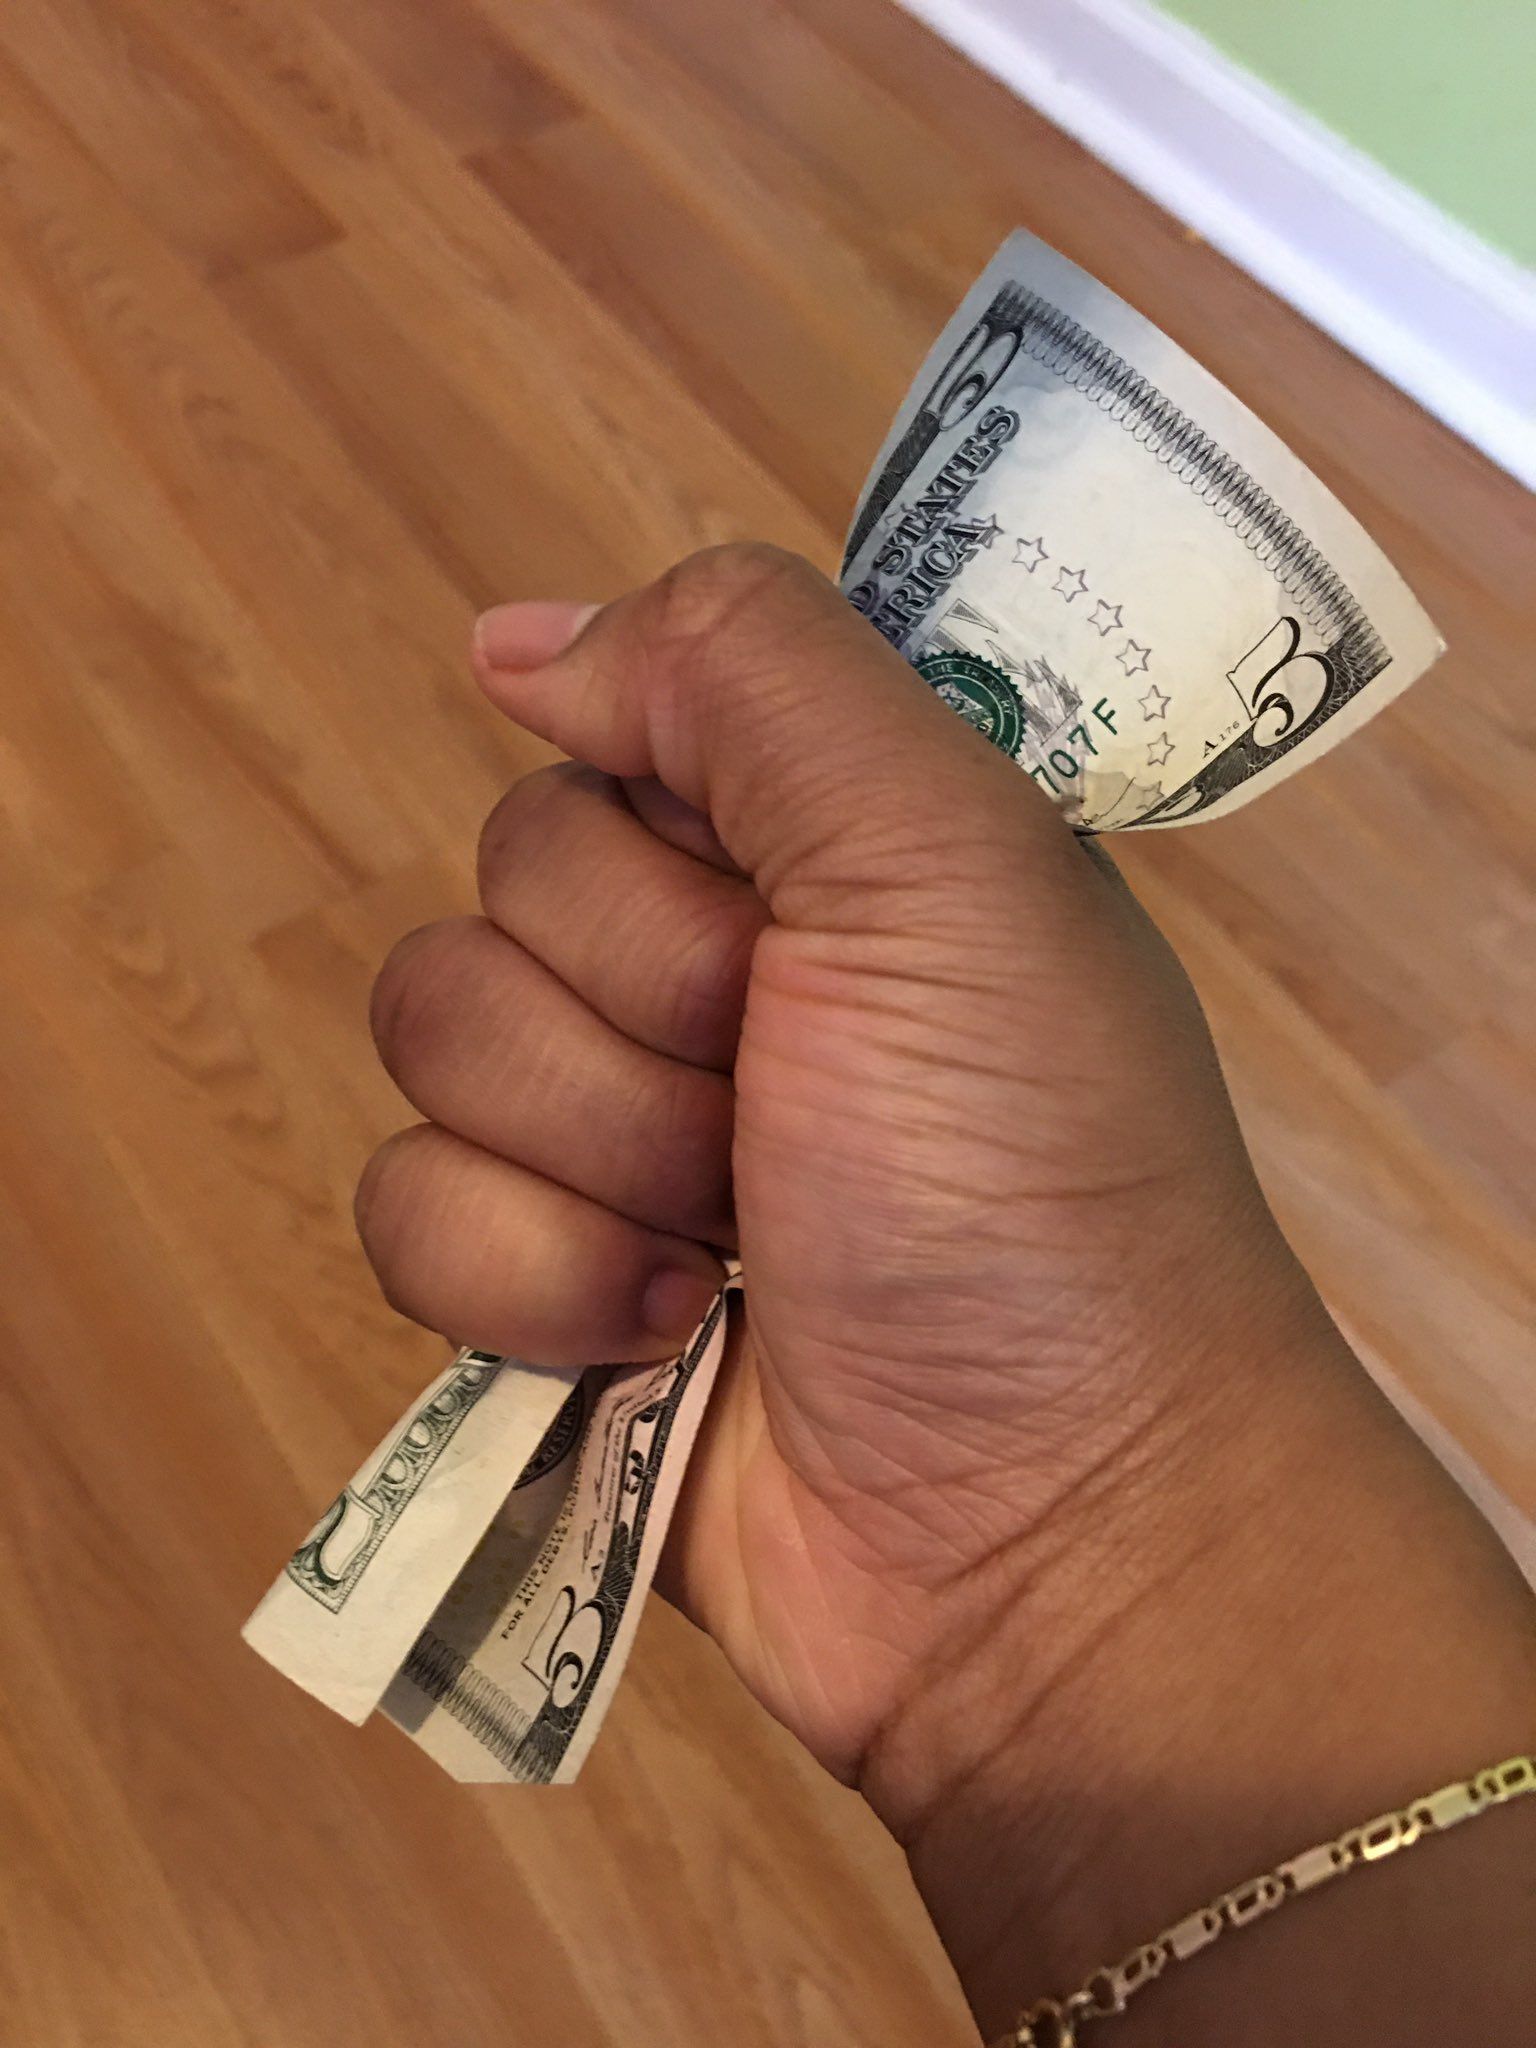 This how they hold money in cartoons